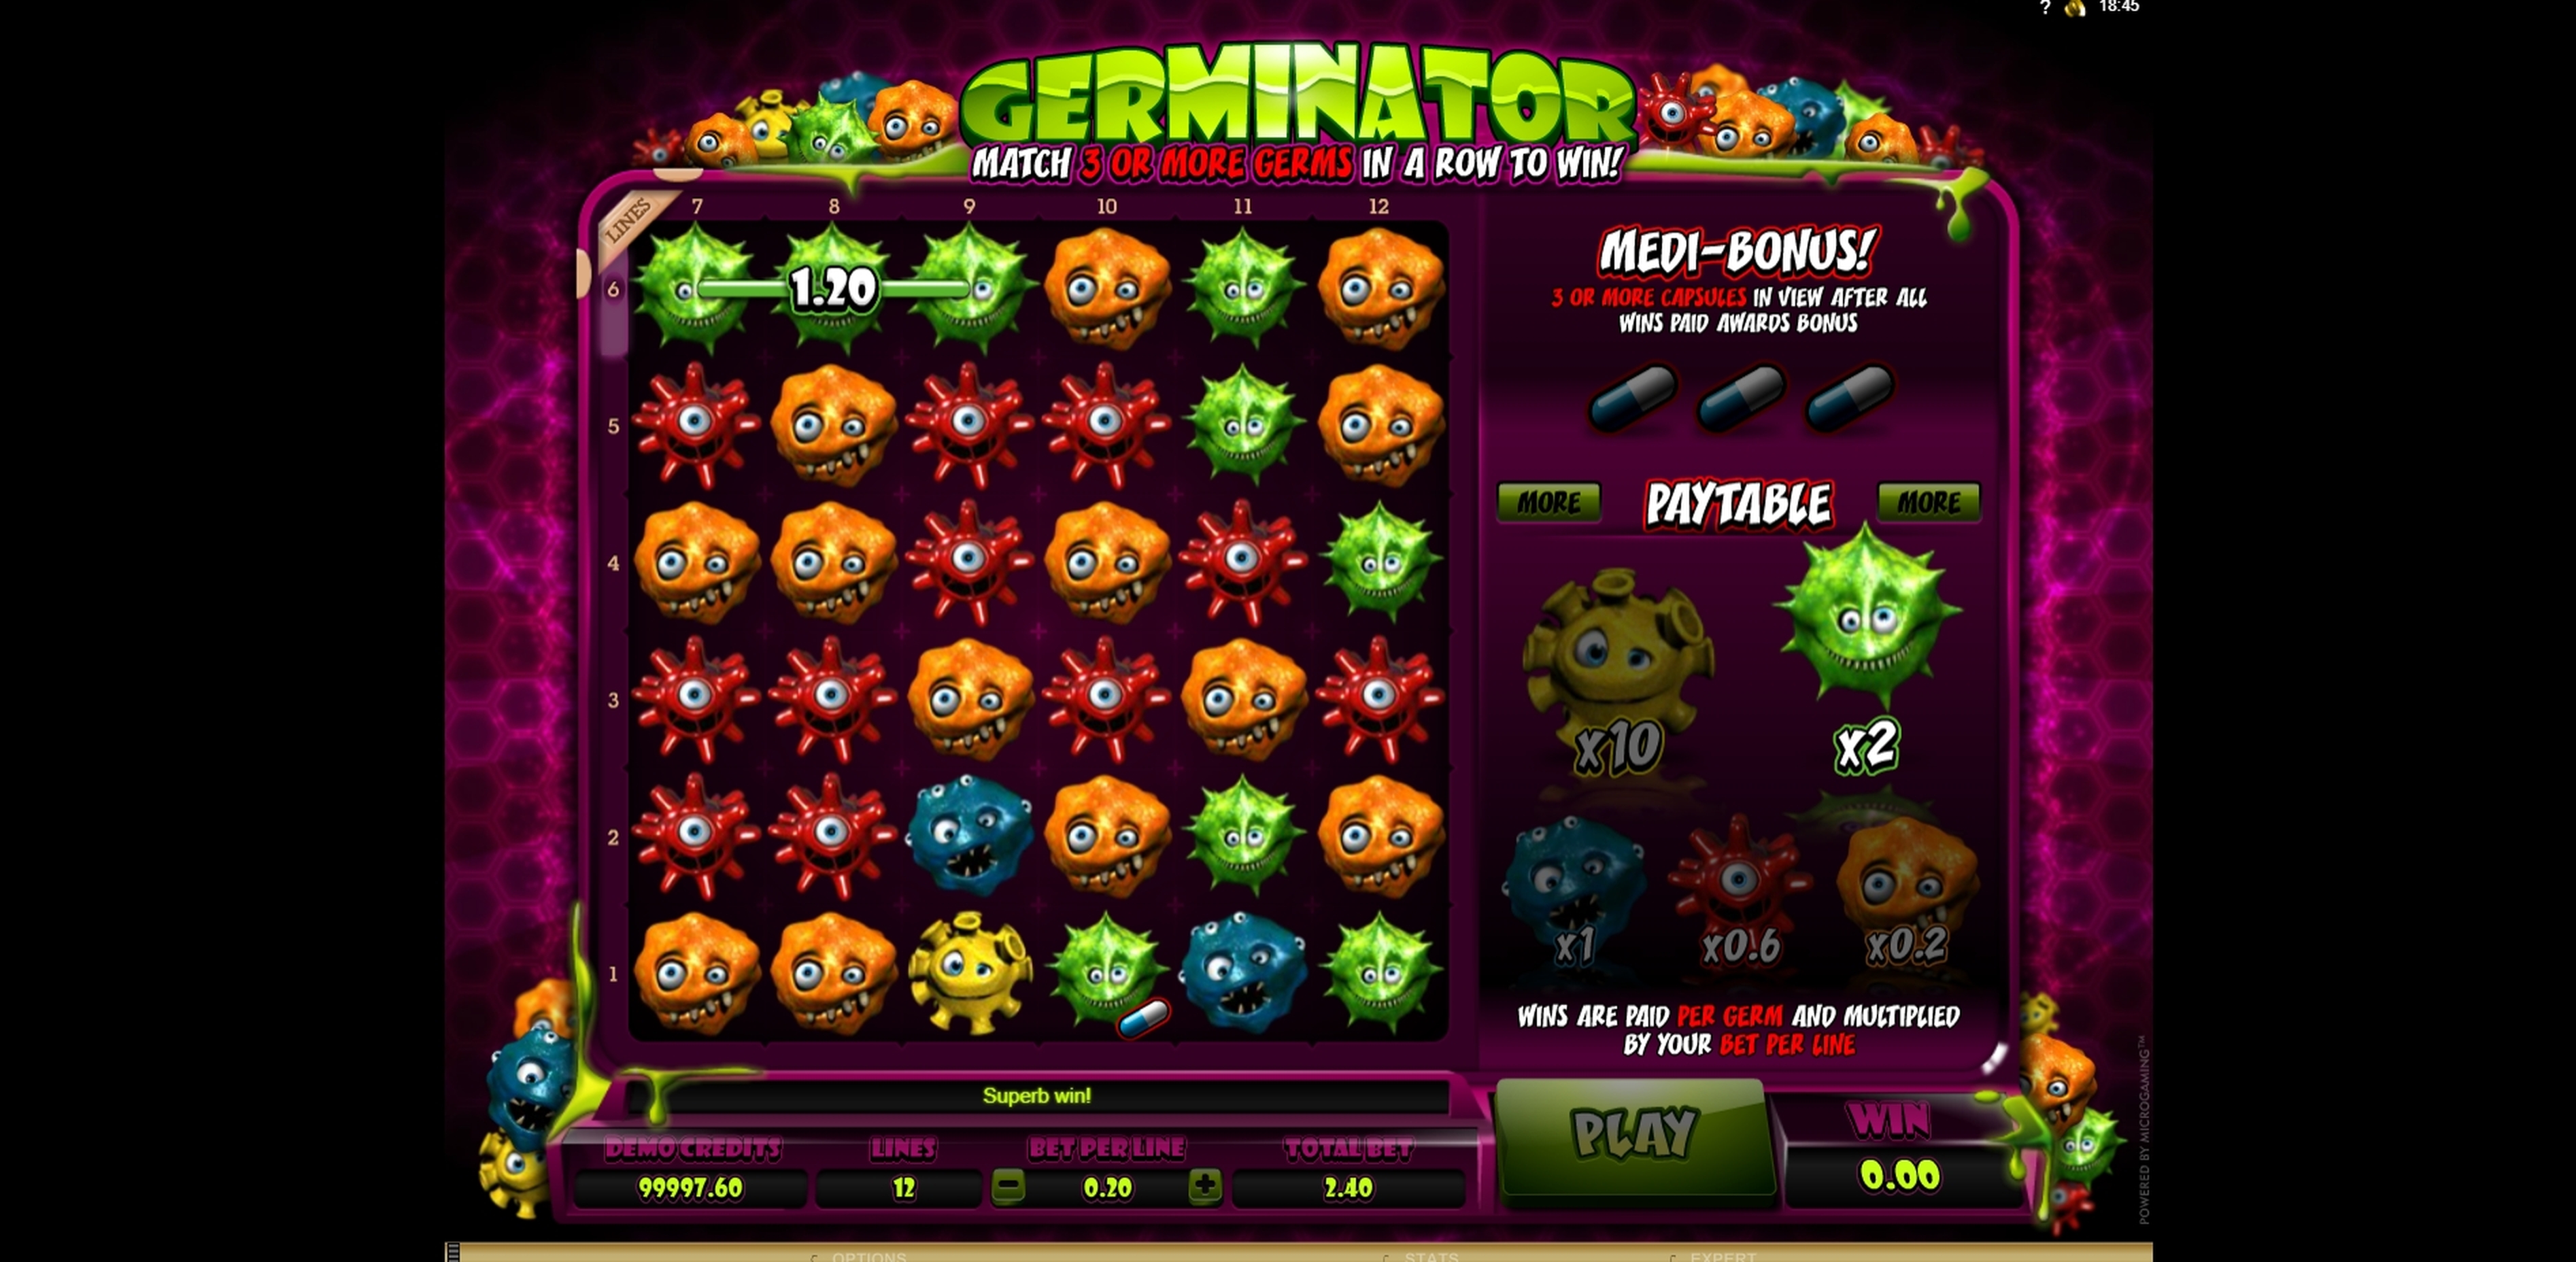 Win Money in Germinator Free Slot Game by Microgaming